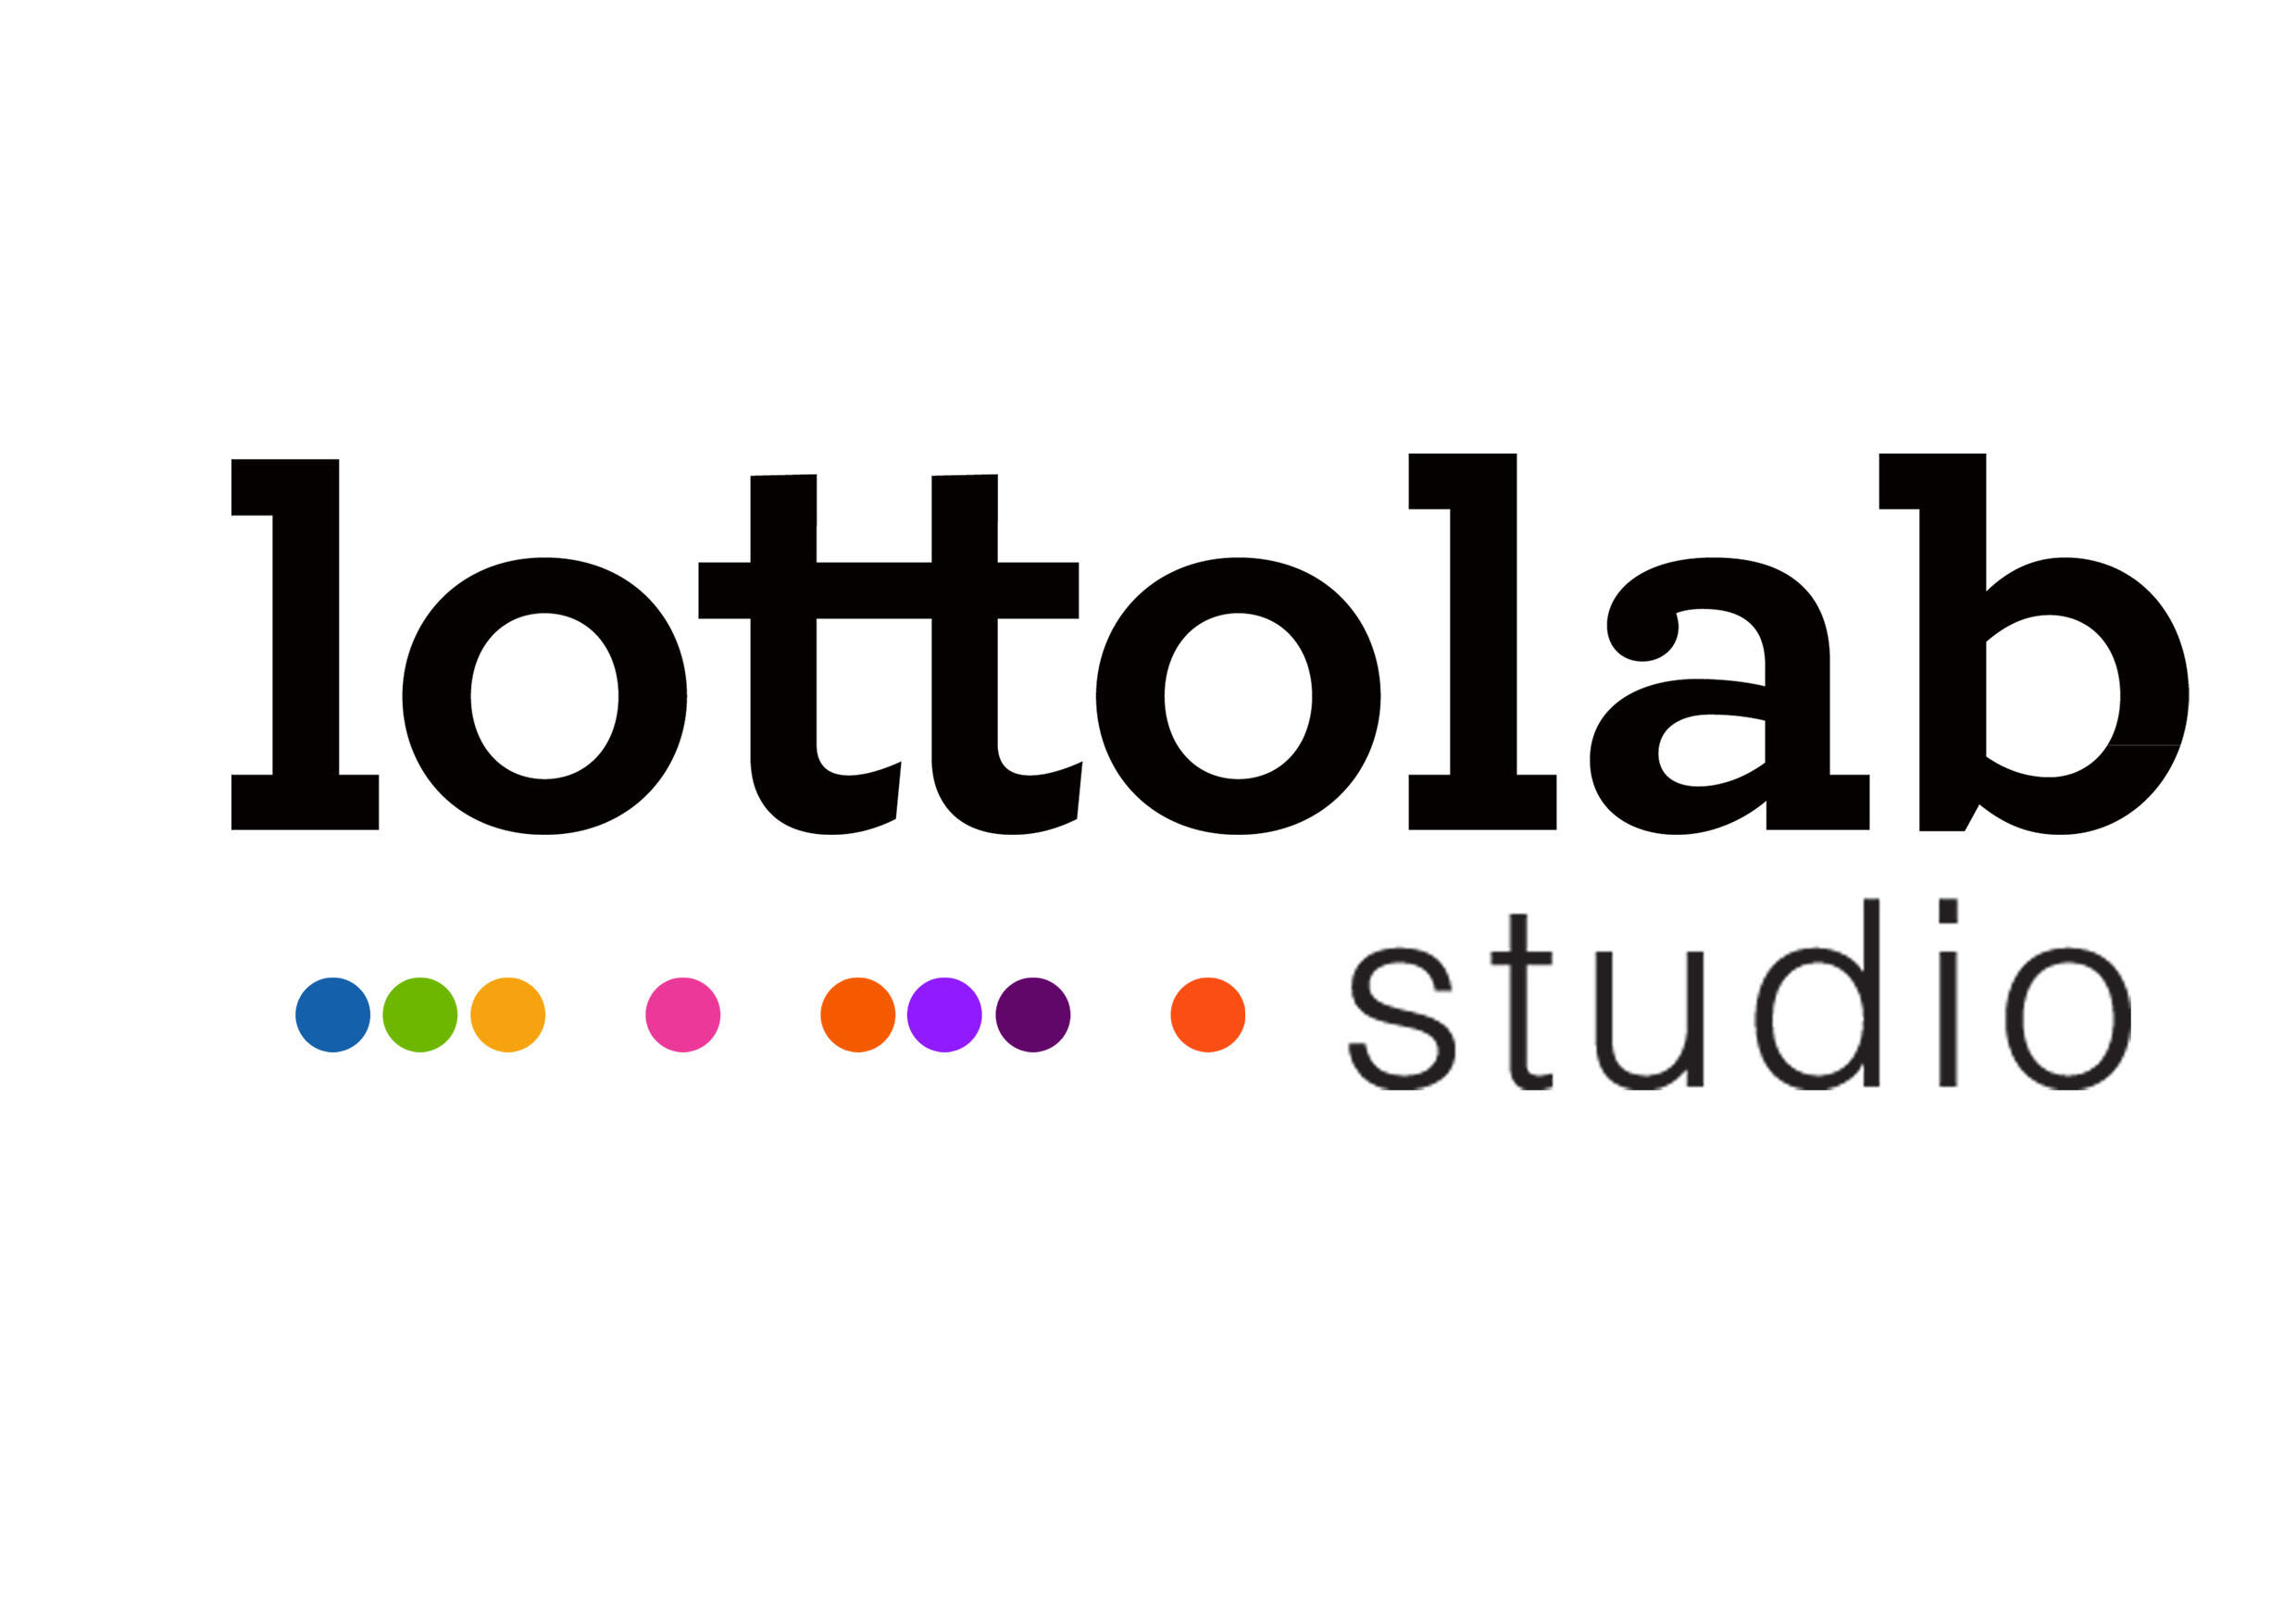 Director of Impossible Projects for Lottolab, the world’s first public perception research lab.